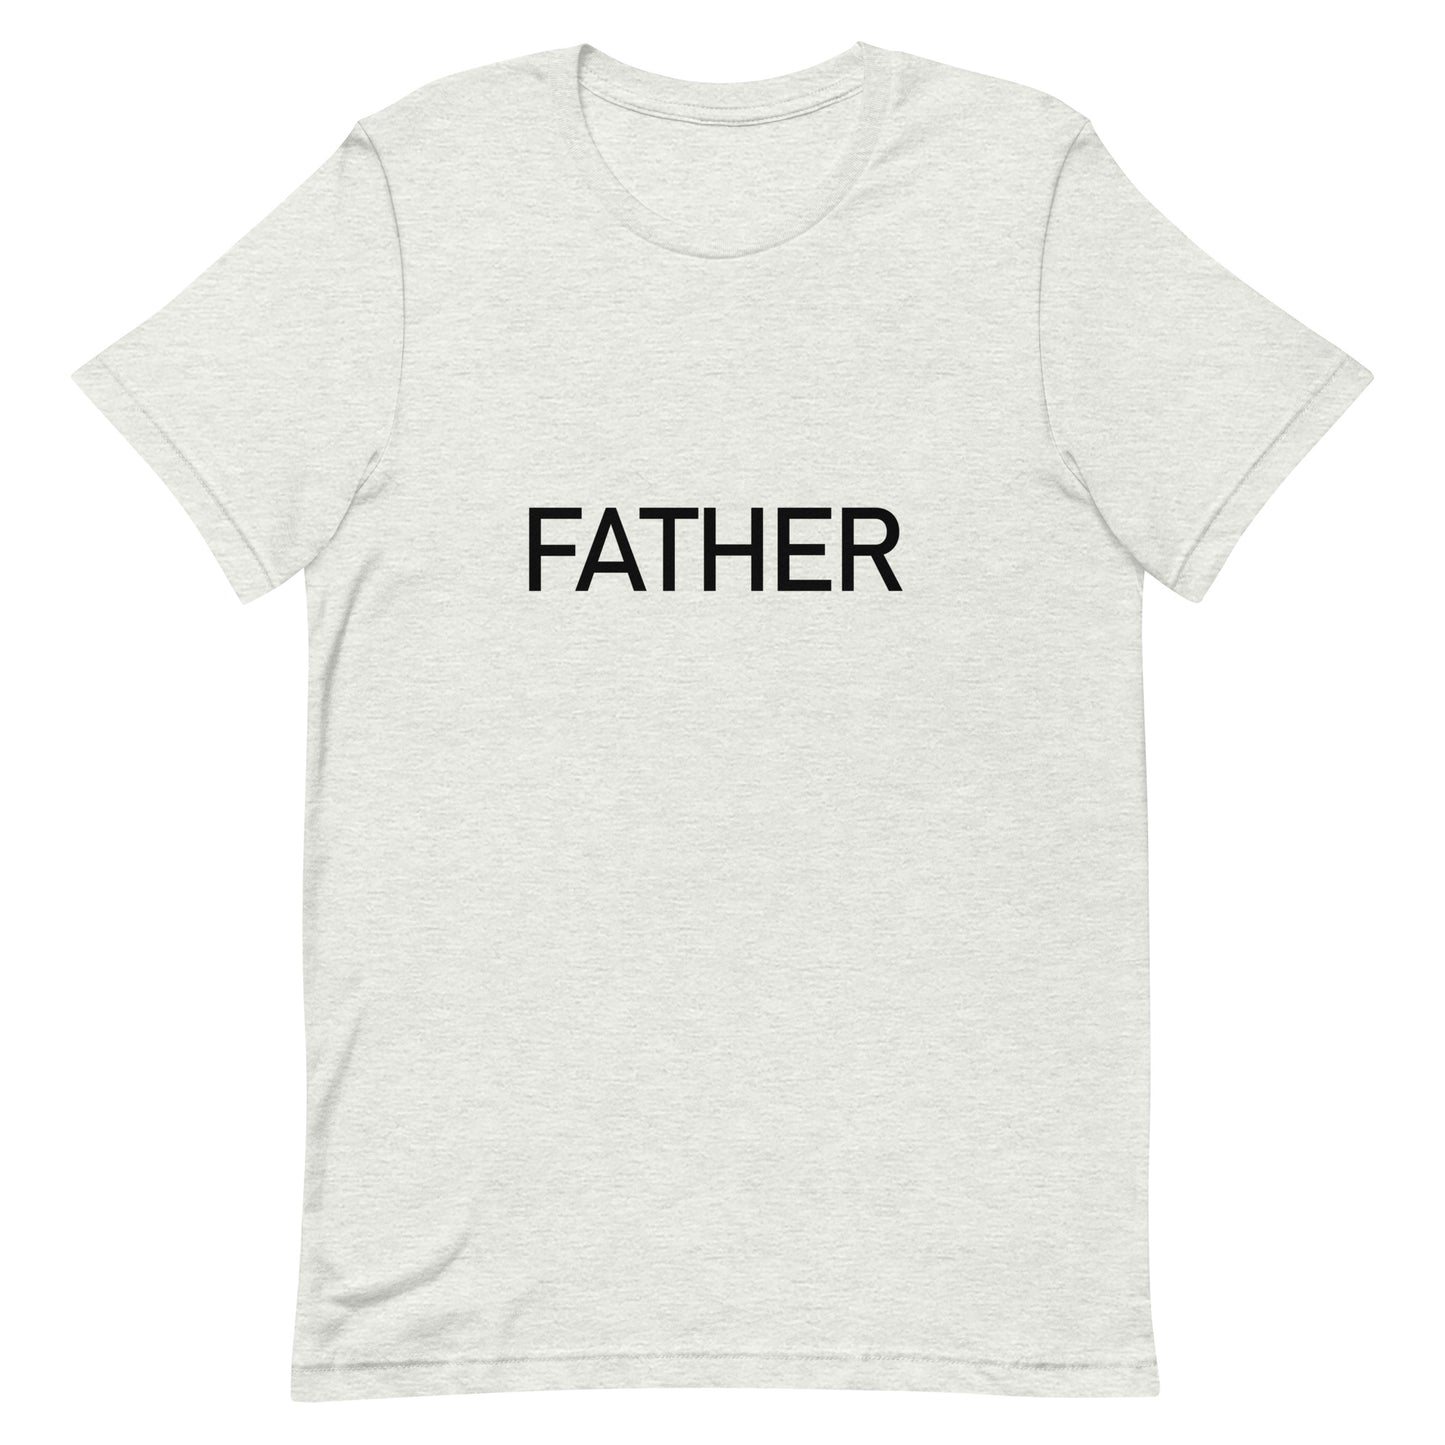 Father Black - Sustainably Made Men’s Short Sleeve Tee